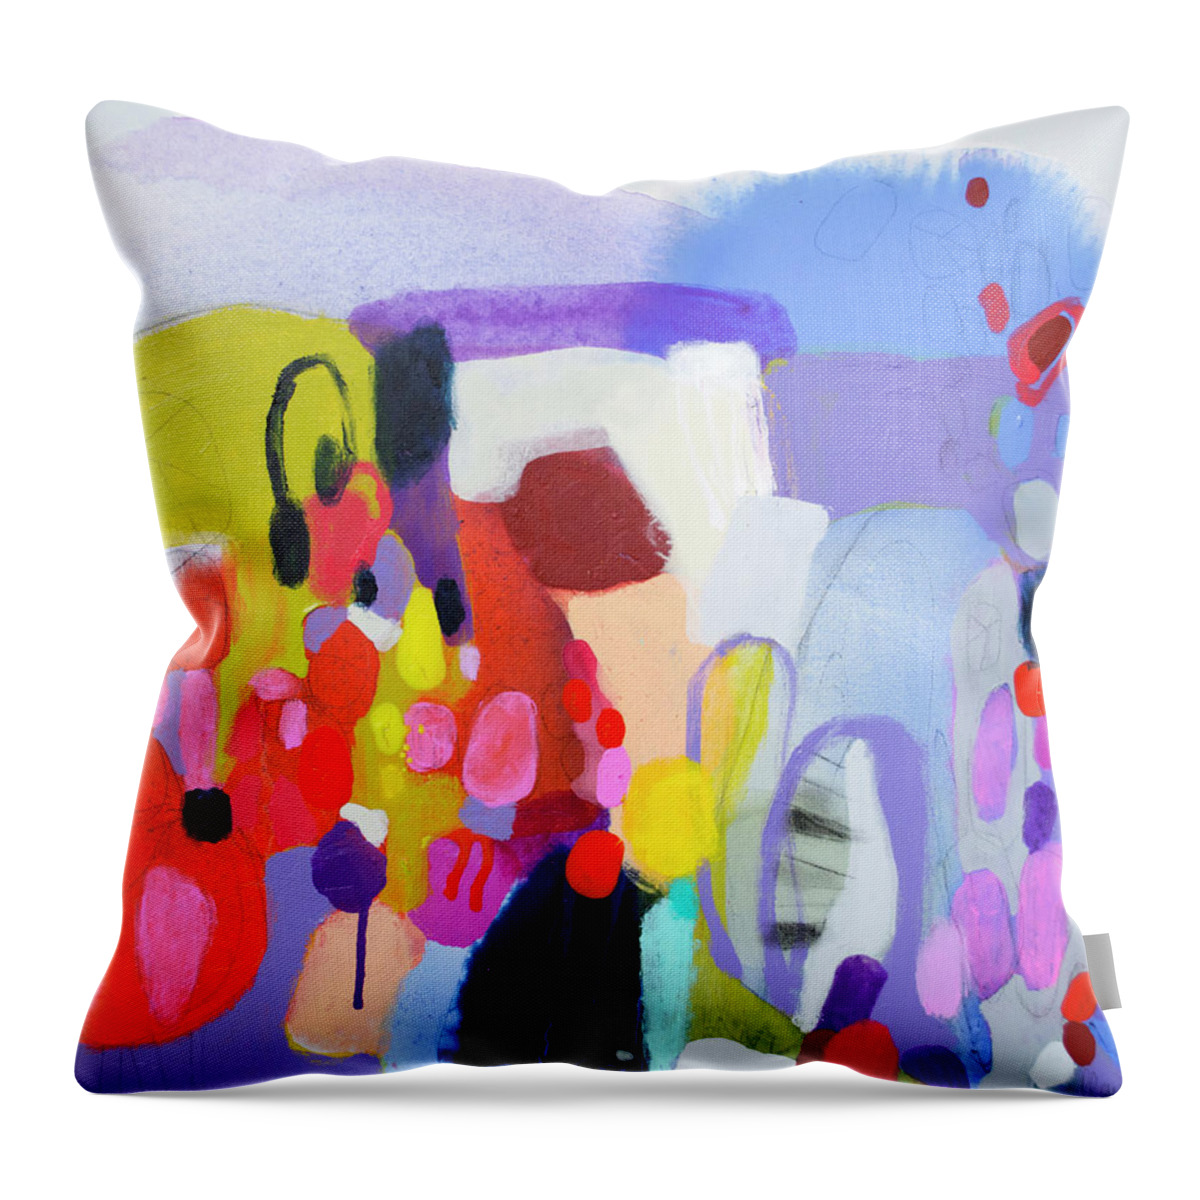 Abstract Throw Pillow featuring the painting On My Mind by Claire Desjardins